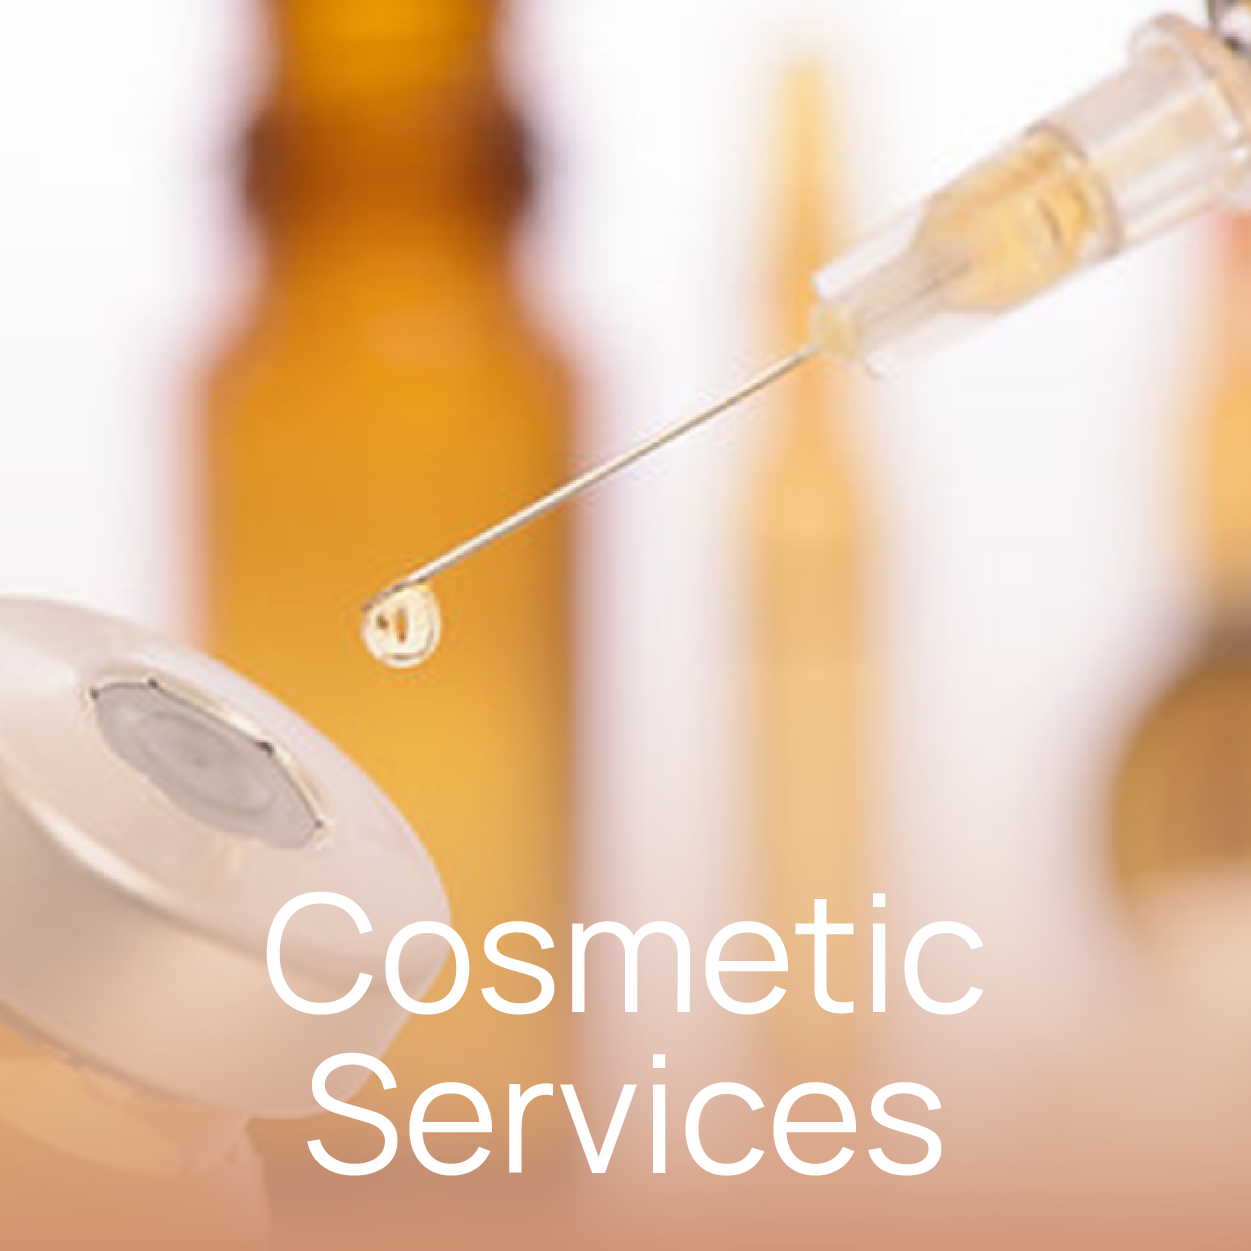 Cosmetic Services, Home